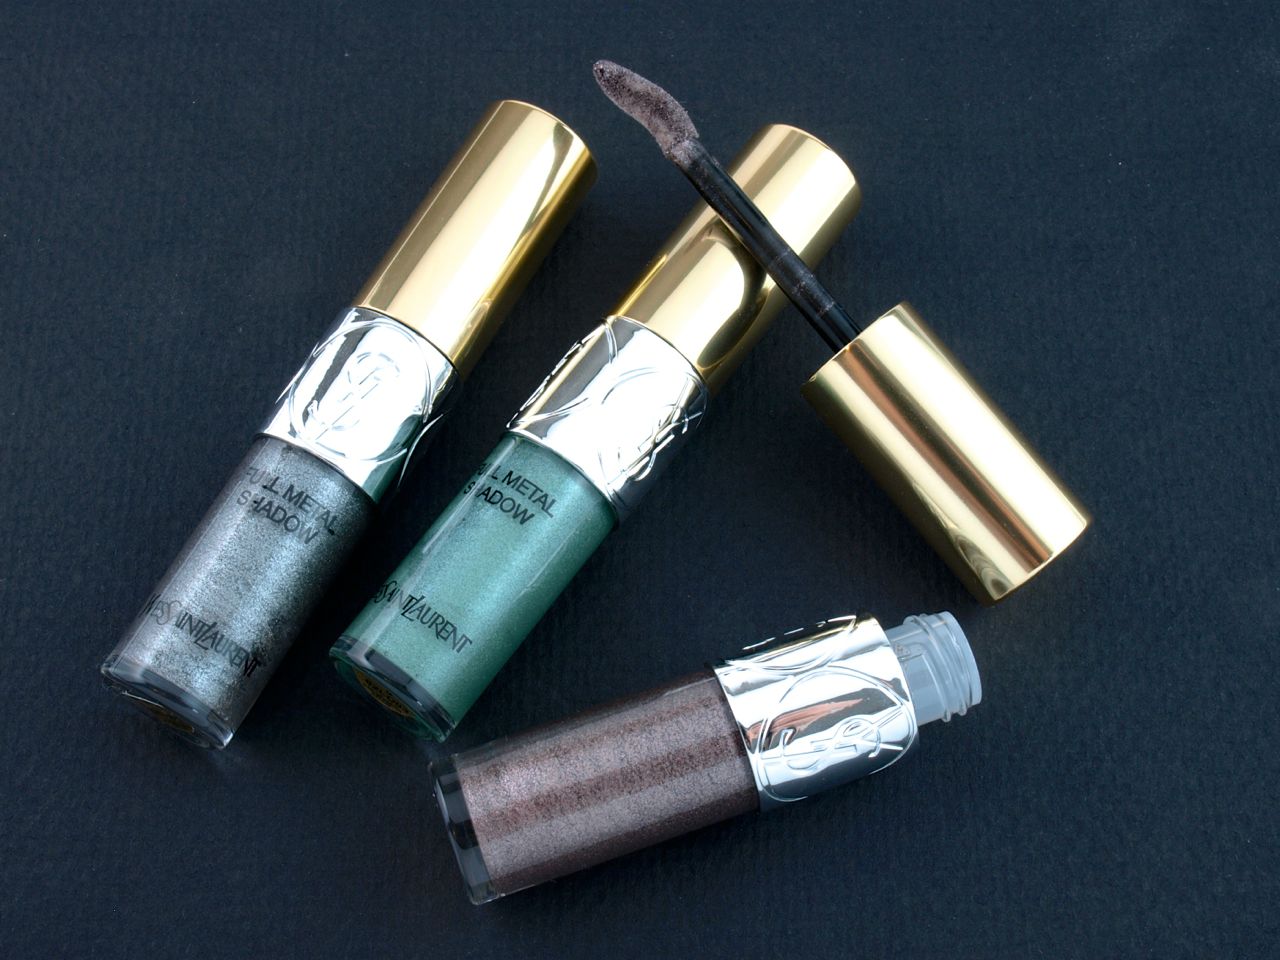 YSL Full Metal Shadow in "1 Grey Splash", "3 Taupe Drop" & "9 Misty Green": Review and Swatches